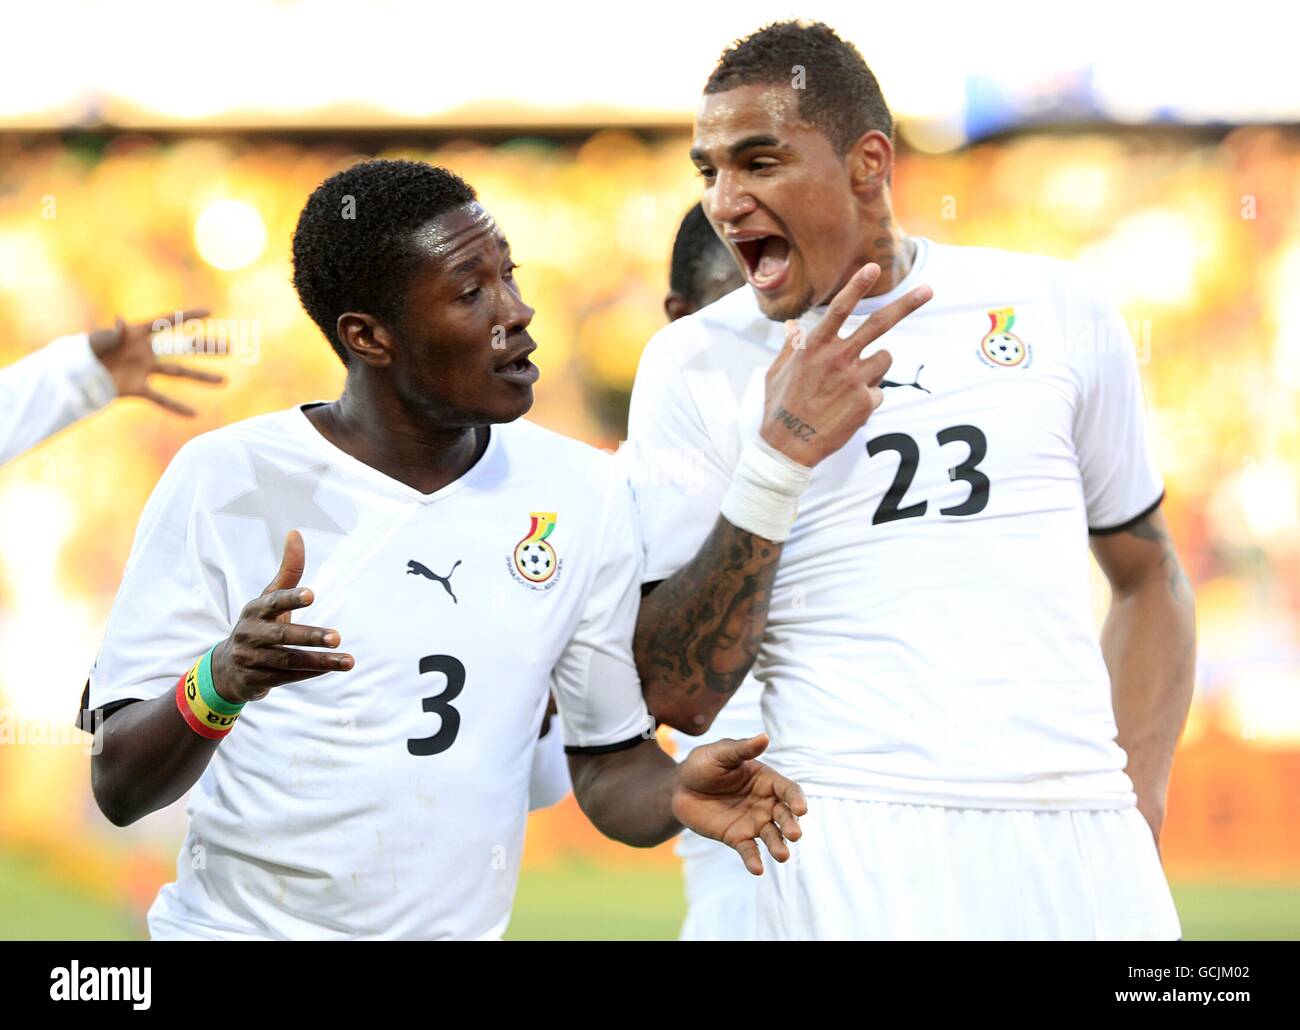 Soccer - 2010 FIFA World Cup South Africa - Group D - Ghana v Australia - Royal Bafokeng Stadium. Ghana's Asamoah Gyan (left) celebrates scoring his sides first goal of the game with Kevin-Prince Boateng Stock Photo